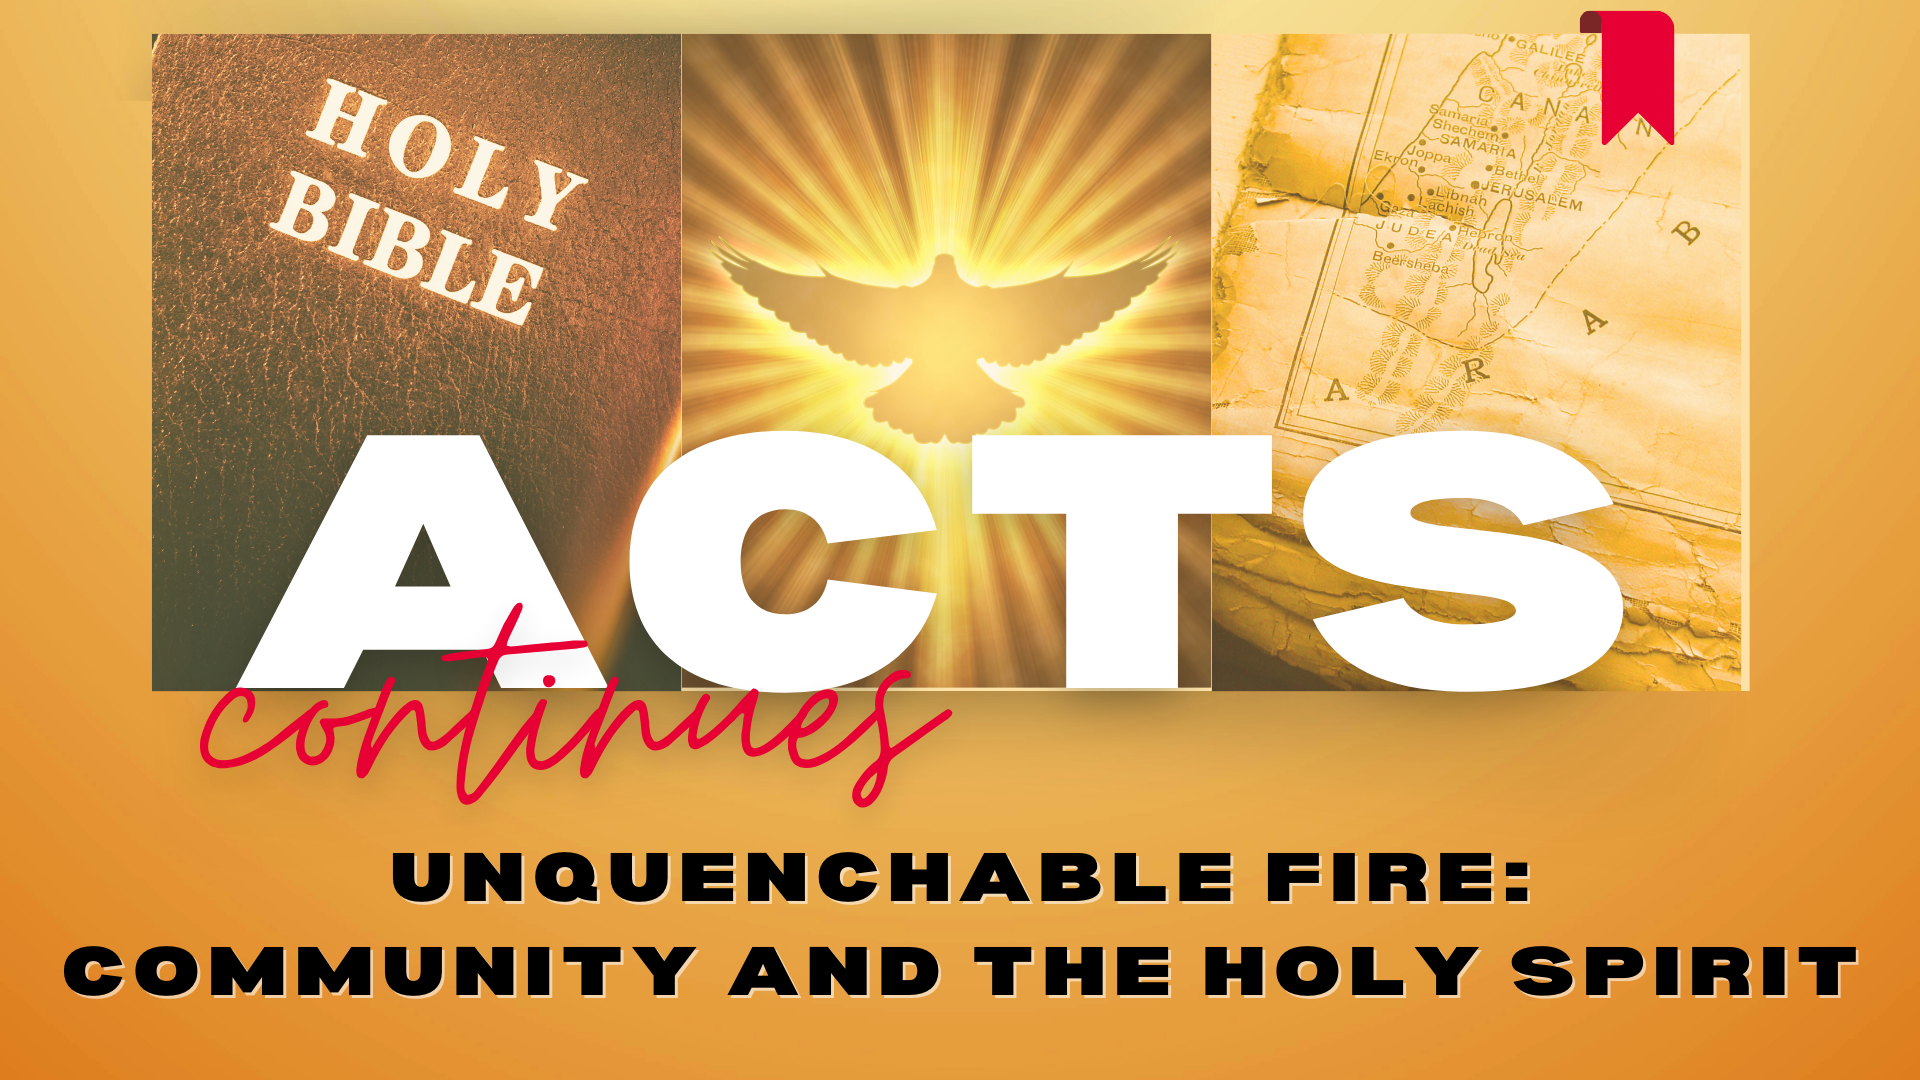 Unquenchable Fire: Community and the Holy Spirit